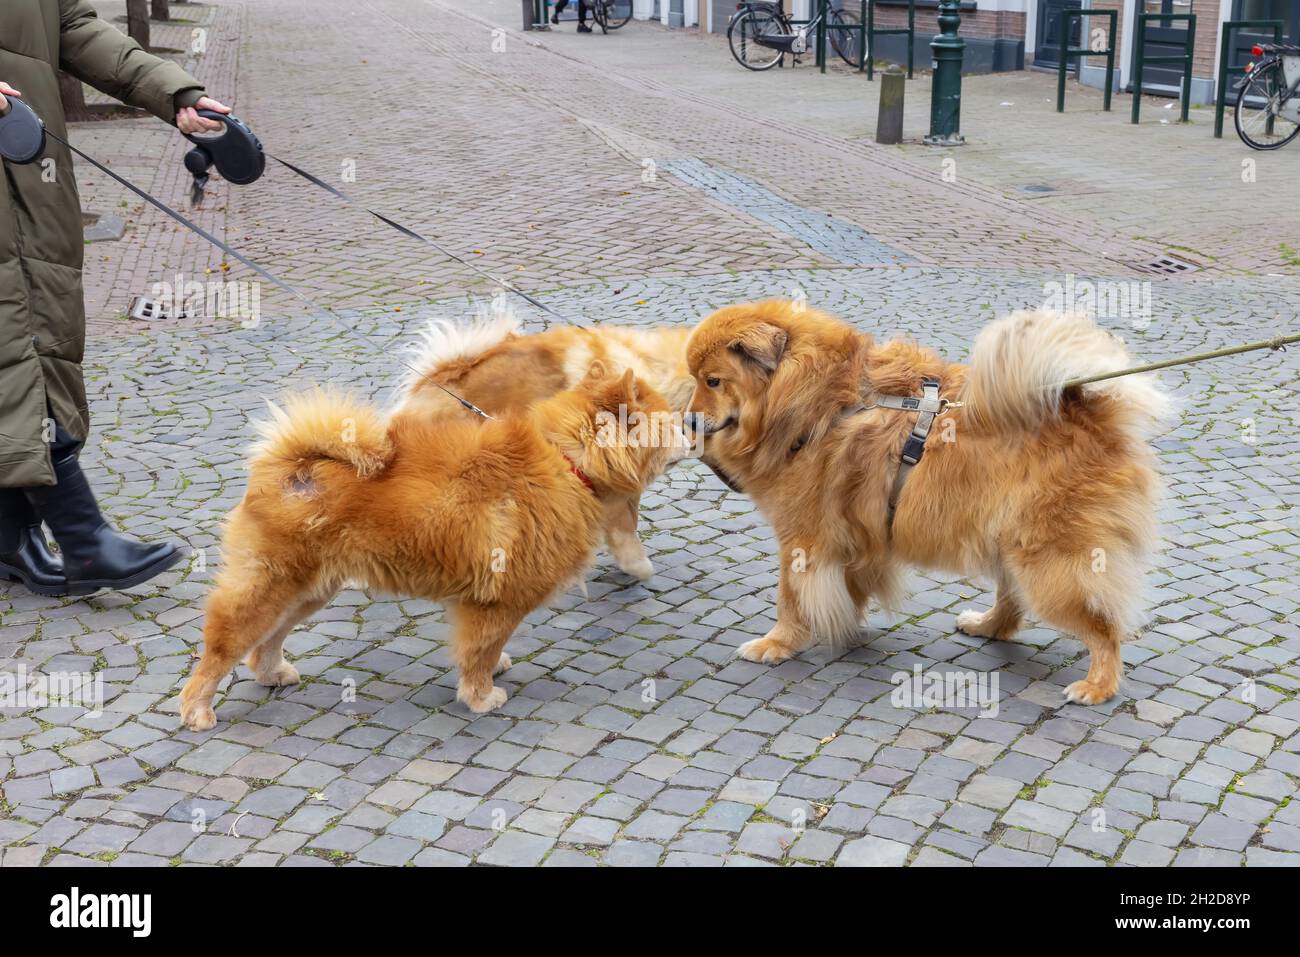 three dogs, an Elo and two Chow Chow, meet in the city and sniff each other Stock Photo